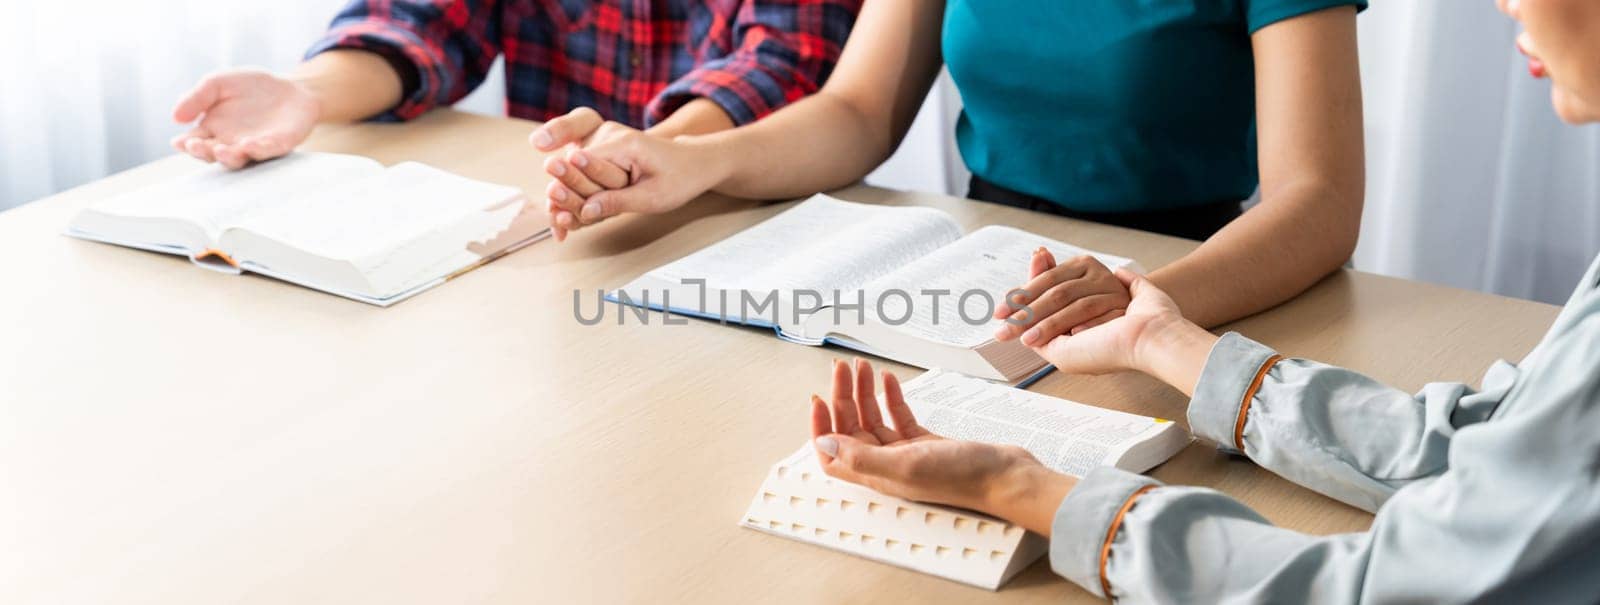 Cropped image of diversity people hand praying together at wooden church on bible book. Group of believer hold hand together faithfully. Concept of hope, religion, faith, god blessing. Burgeoning.